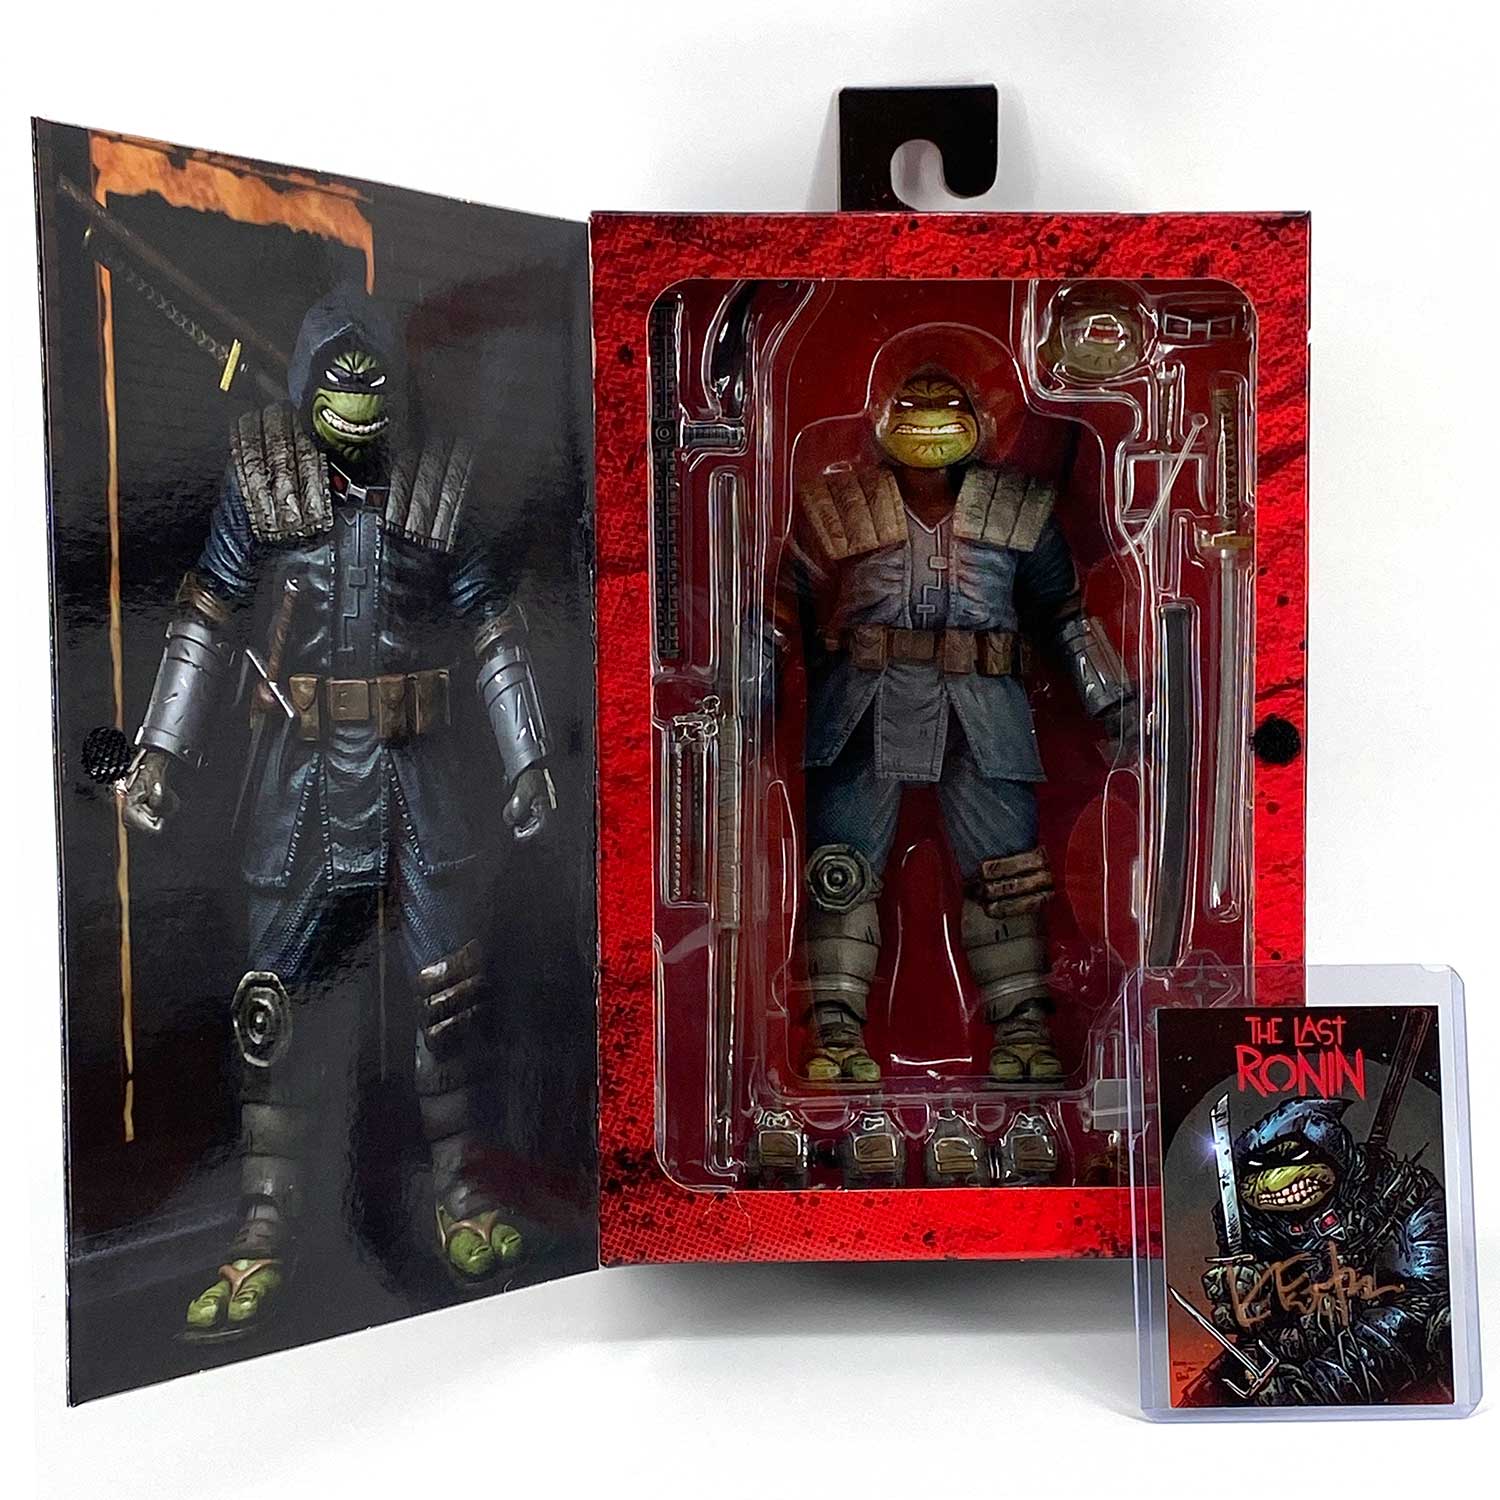 Even More New Stunning NECA Figures and Hand Signed Art Cards